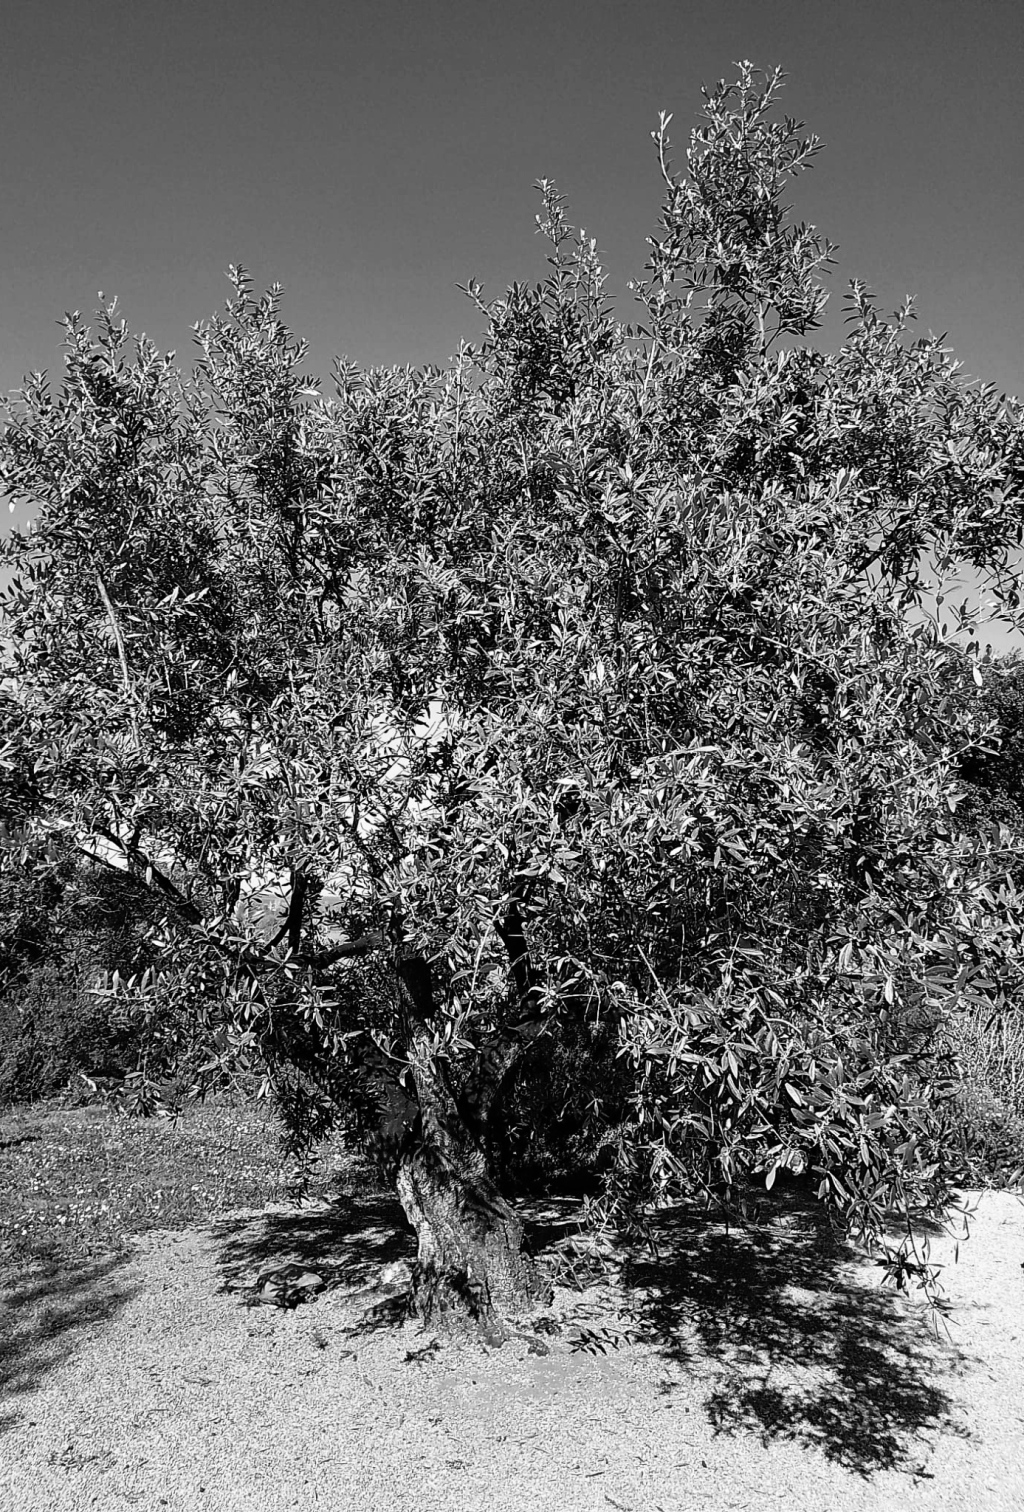 The Olive Grove’s Blessing / E.T.